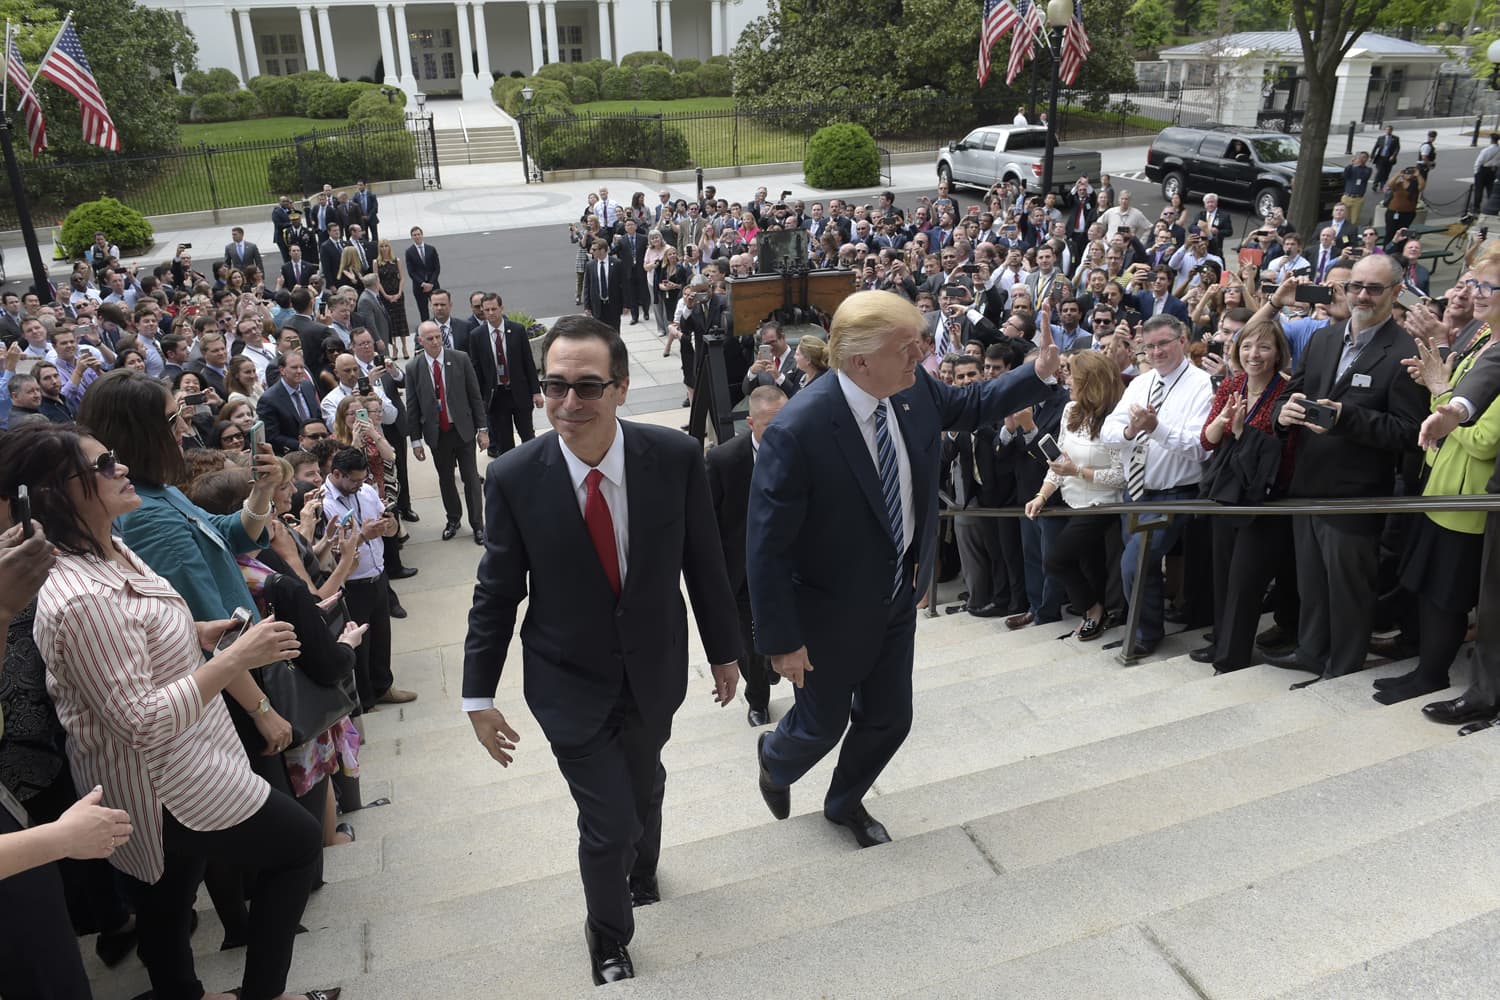 President Donald Trump and Treasury Secretary Steven Mnuchin arrive at the Treasury Department in Washington, Friday, April 21, 2017, where the president was to sign an executive order to review tax regulations. (AP Photo/Susan Walsh)